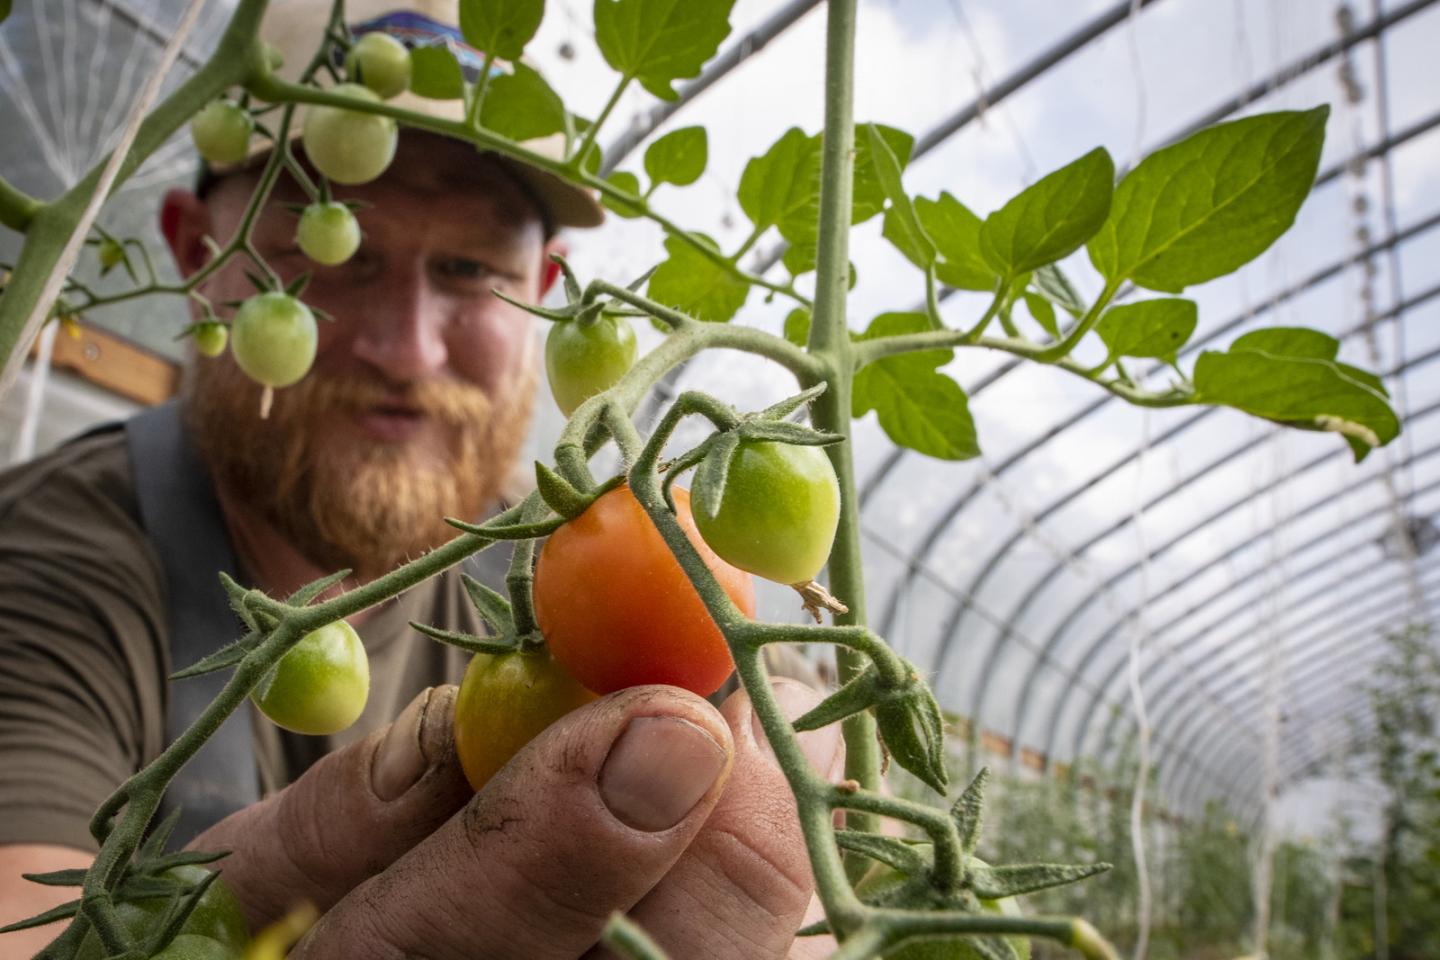 Cody Scott harvests grape tomatoes at Green Bexar Farm, in Saint Hedwig, Texas, near San Antonio, on Oct 21, 2020. Cody and Natalie Scott started with a 10-acre pecan grove in 2017 and has since converted one acre for a wide variety of produce on micro irrigated beds outdoors and in three seasonal high tunnels installed with the technical and financial conservation assistance of the U.S. Department of Agriculture (USDA) Natural Resources Conservation Service (NRCS). Cody estimates it would have taken him te